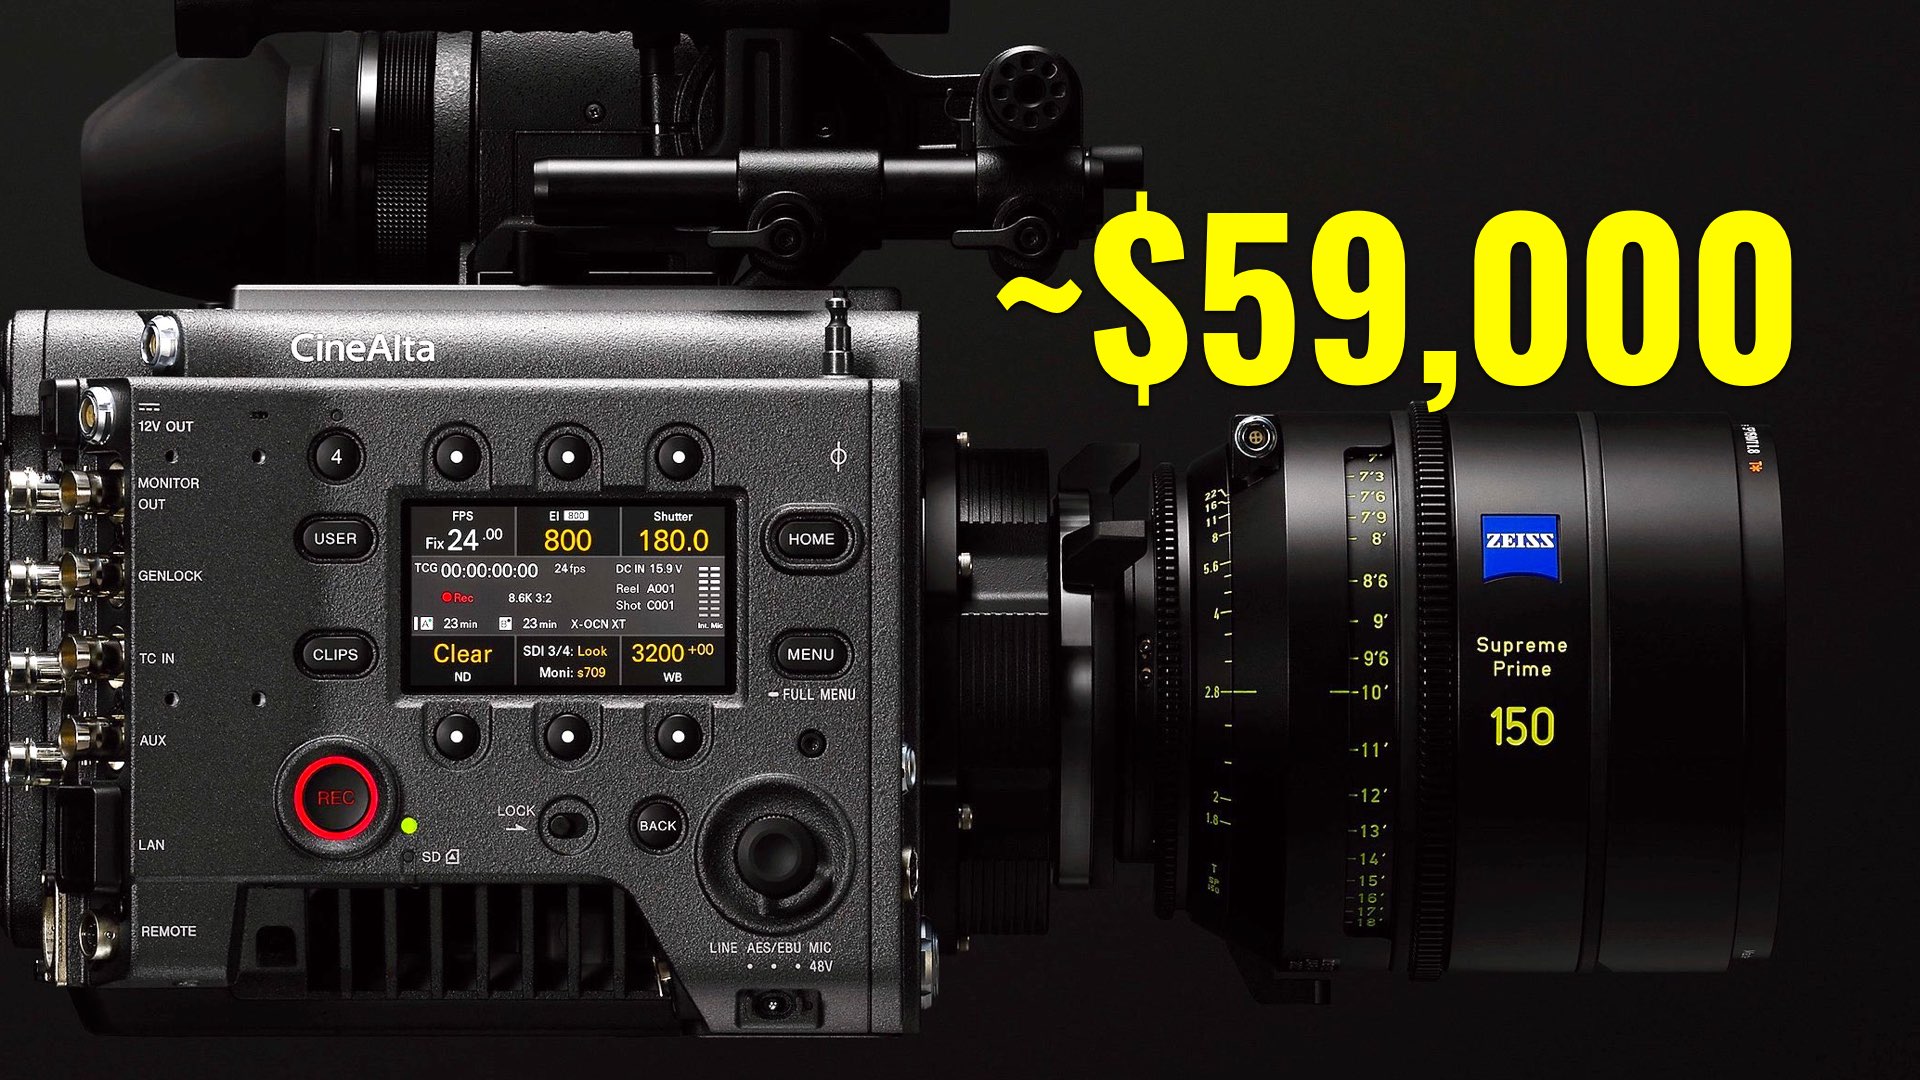 Funnel web spider Ideal assist The Sony VENICE 2 Prices Have Been Revealed - YMCinema - News & Insights on  Digital Cinema